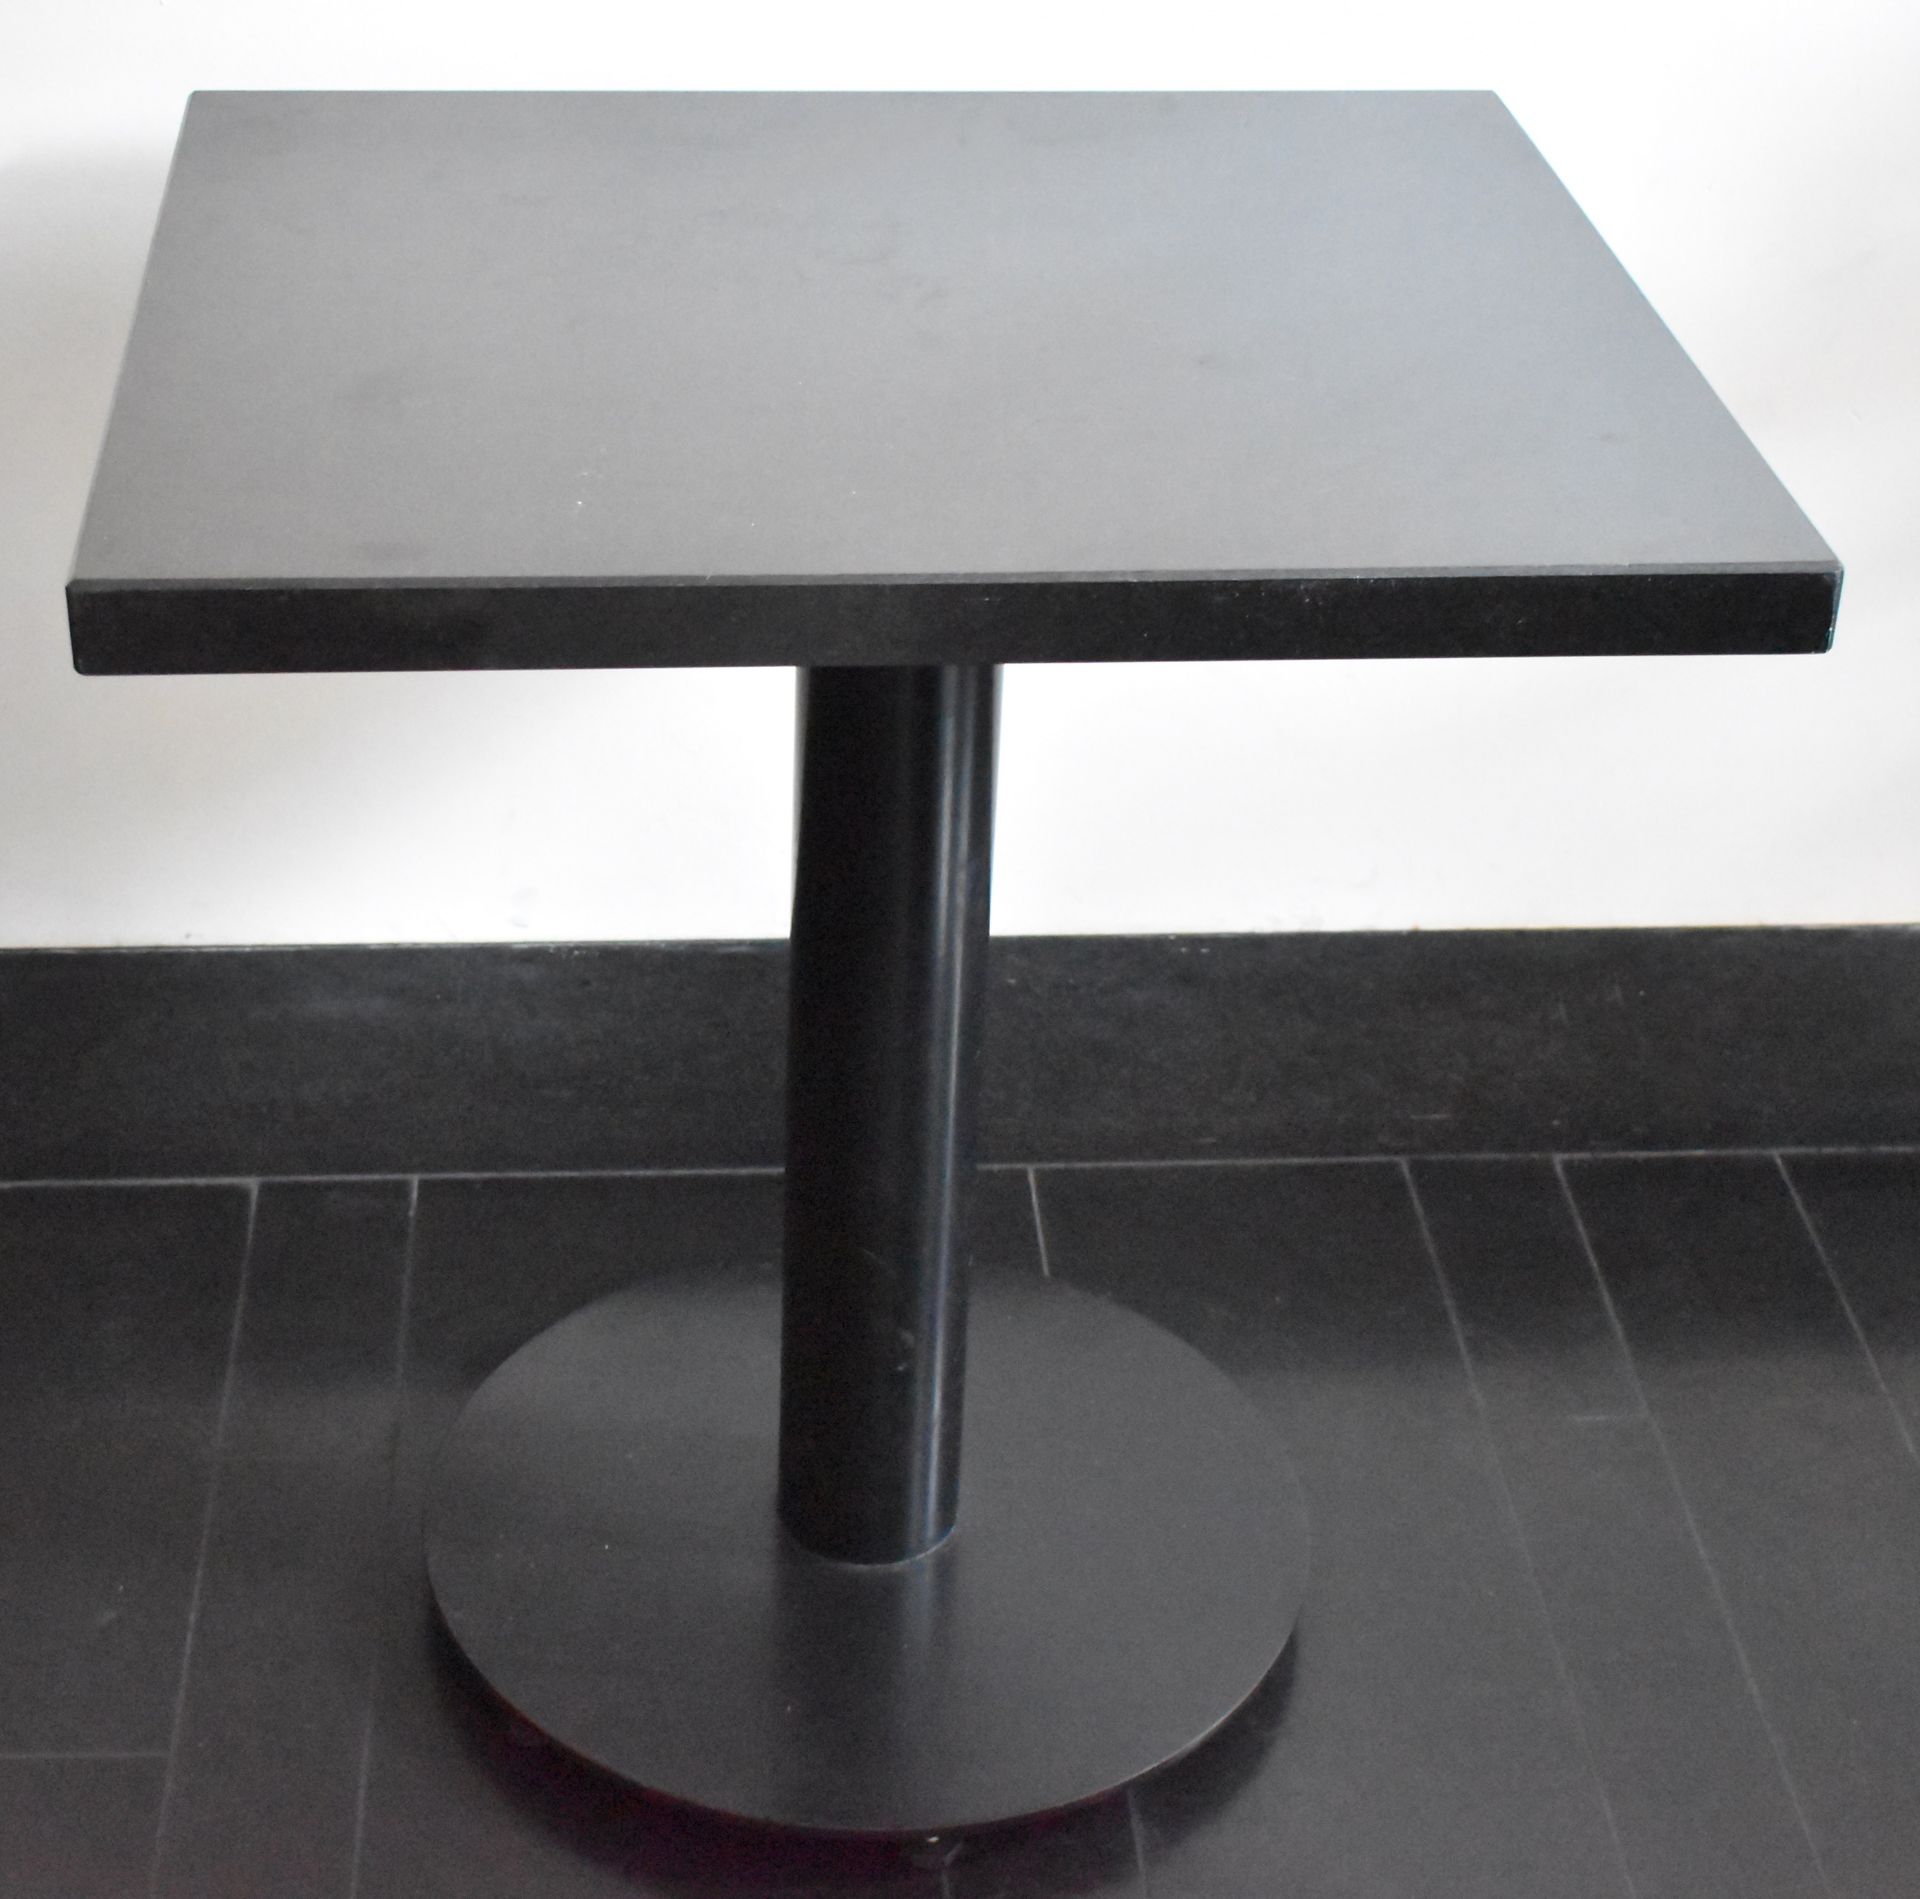 4 x Restaurant Bistro Tables With Granite Stone Tops and Substantial Metal Bases - Dimensions: H77 x